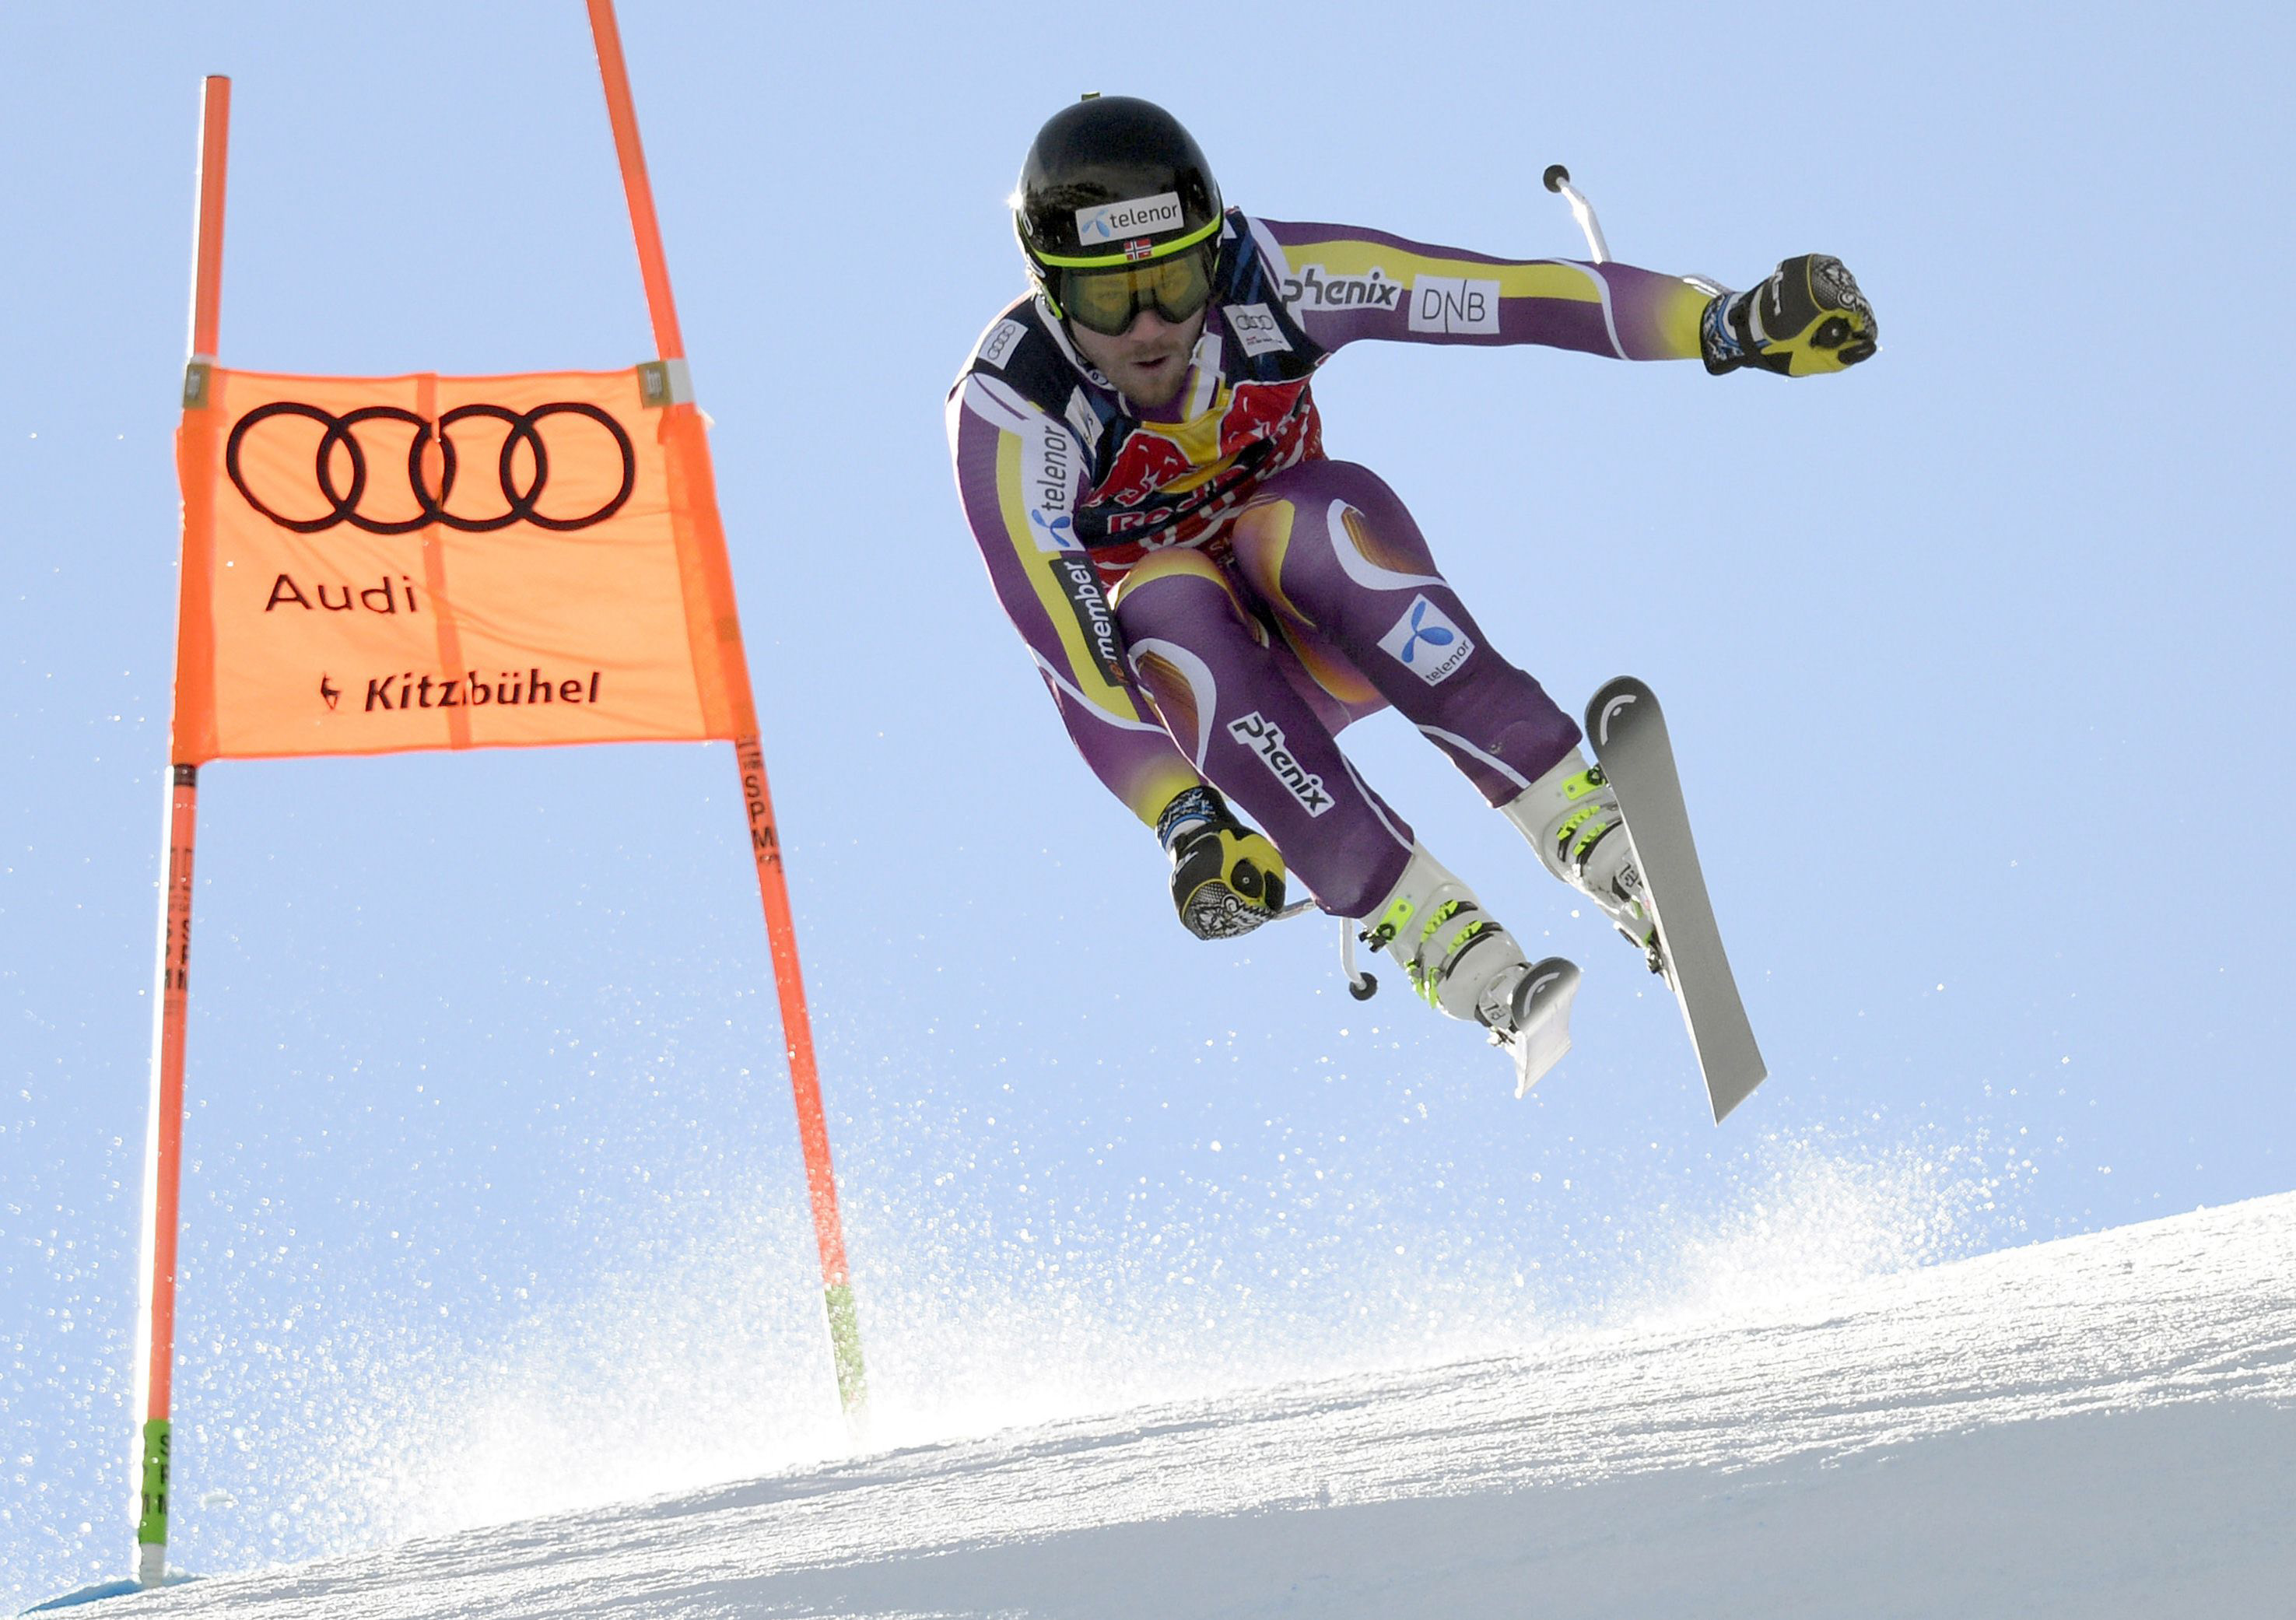 In Alpine skiing, Asian nations face long run to become competitive ...